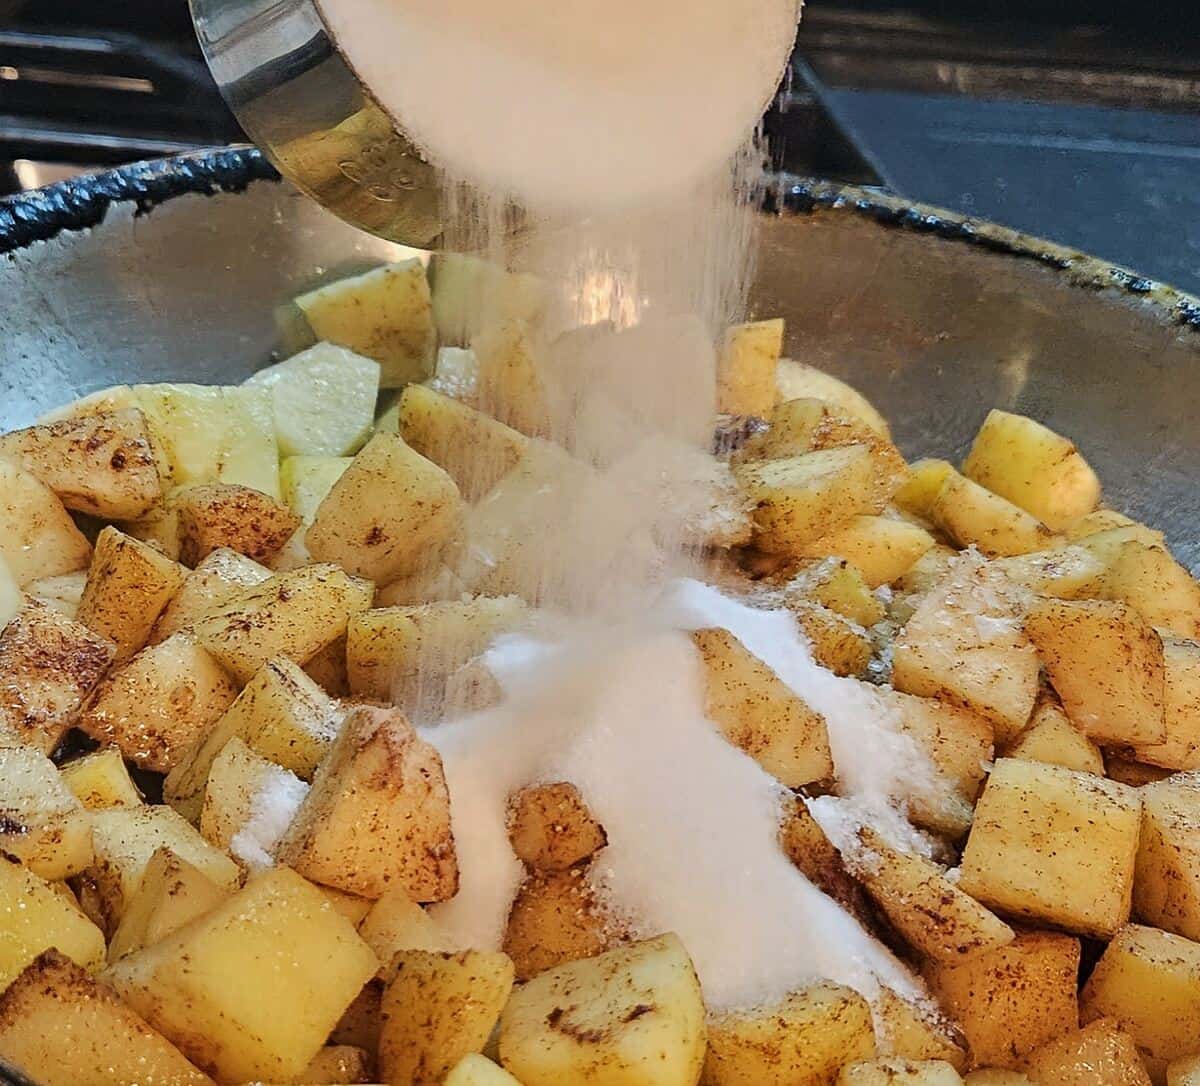 granulated sugar being poured into a skillet of spiced and cooking apple chunks.